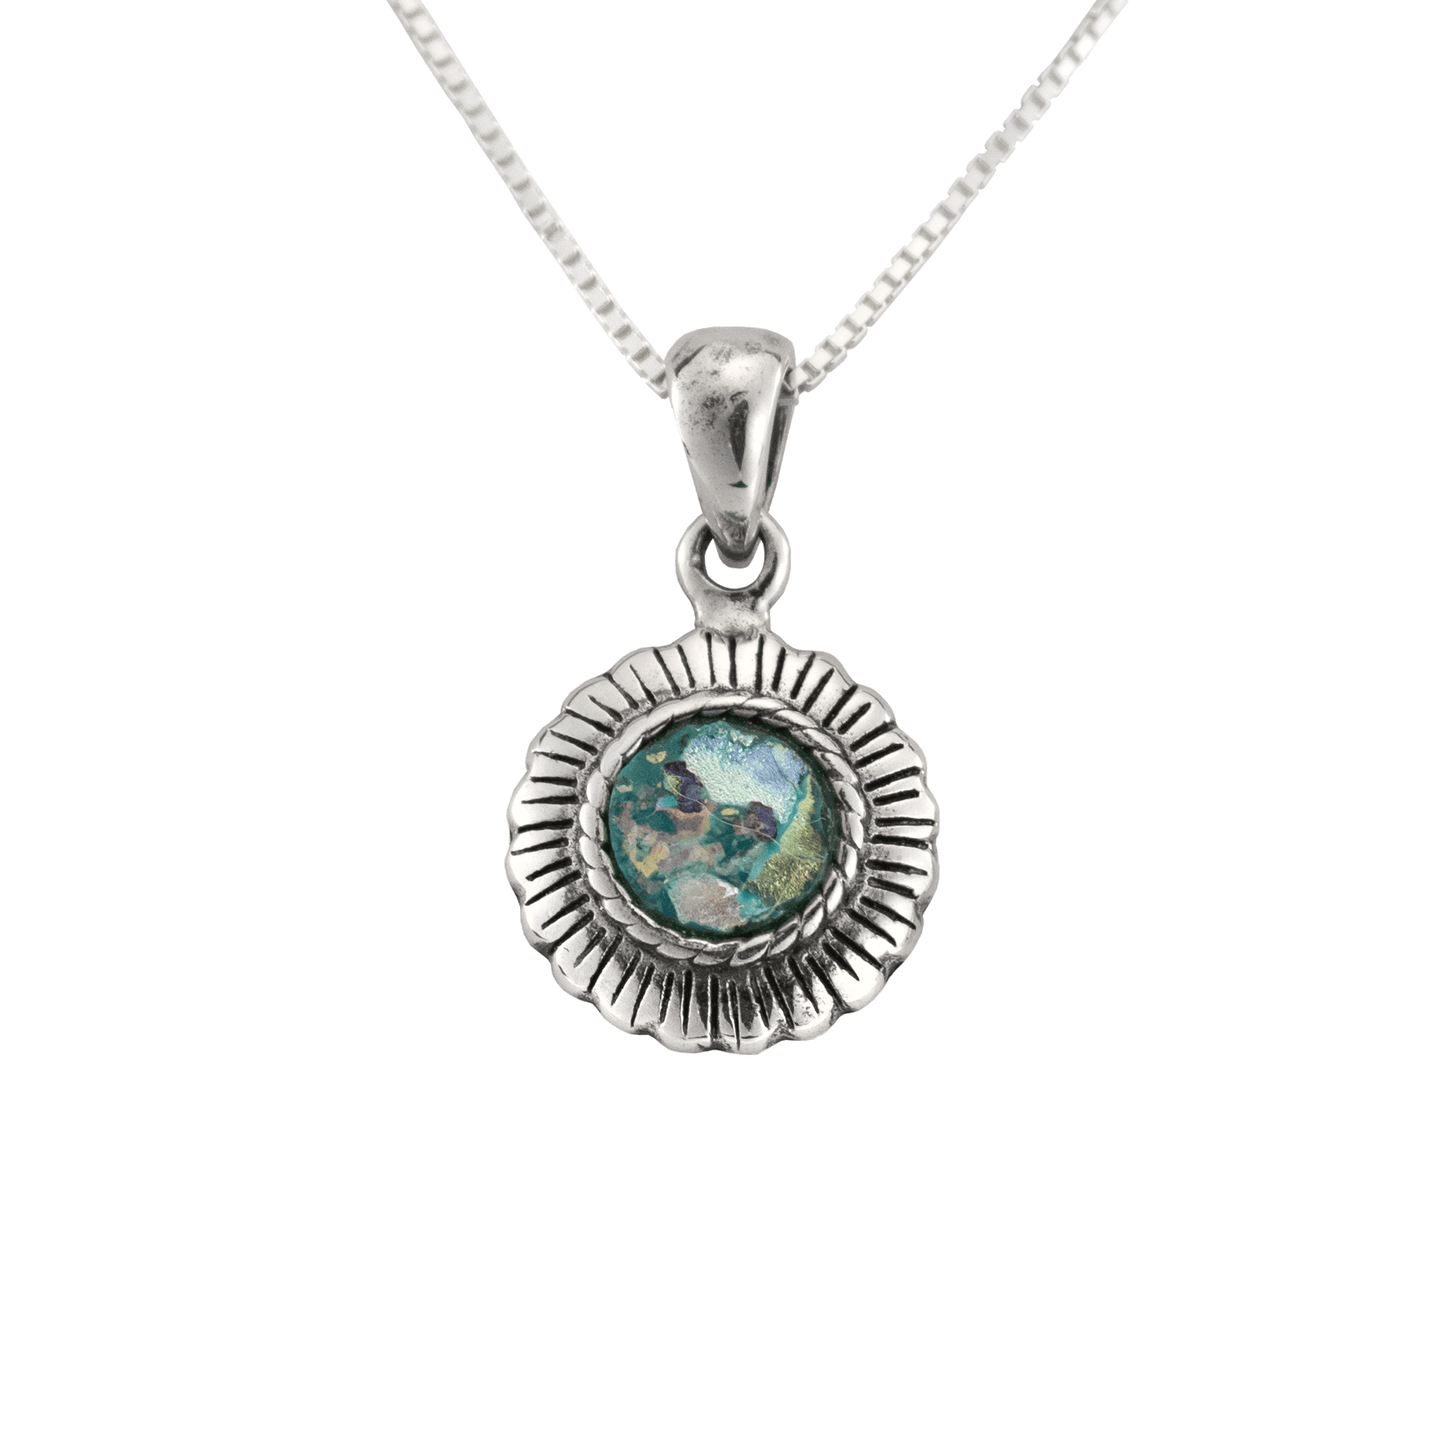 Silver flower pendant holding a round Roman Glass in the center.